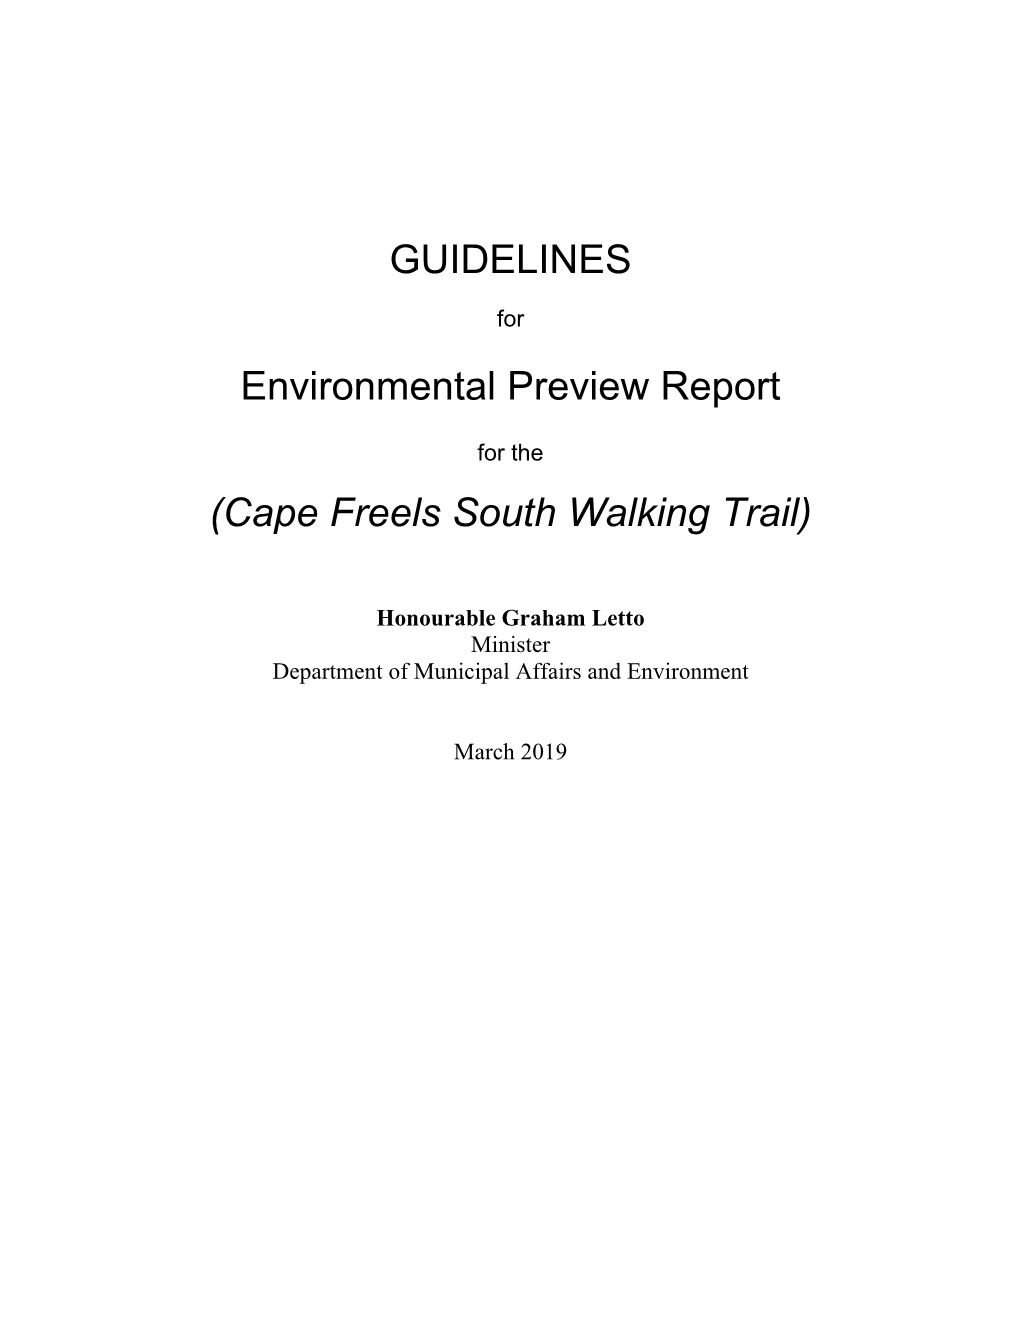 GUIDELINES Environmental Preview Report (Cape Freels South Walking